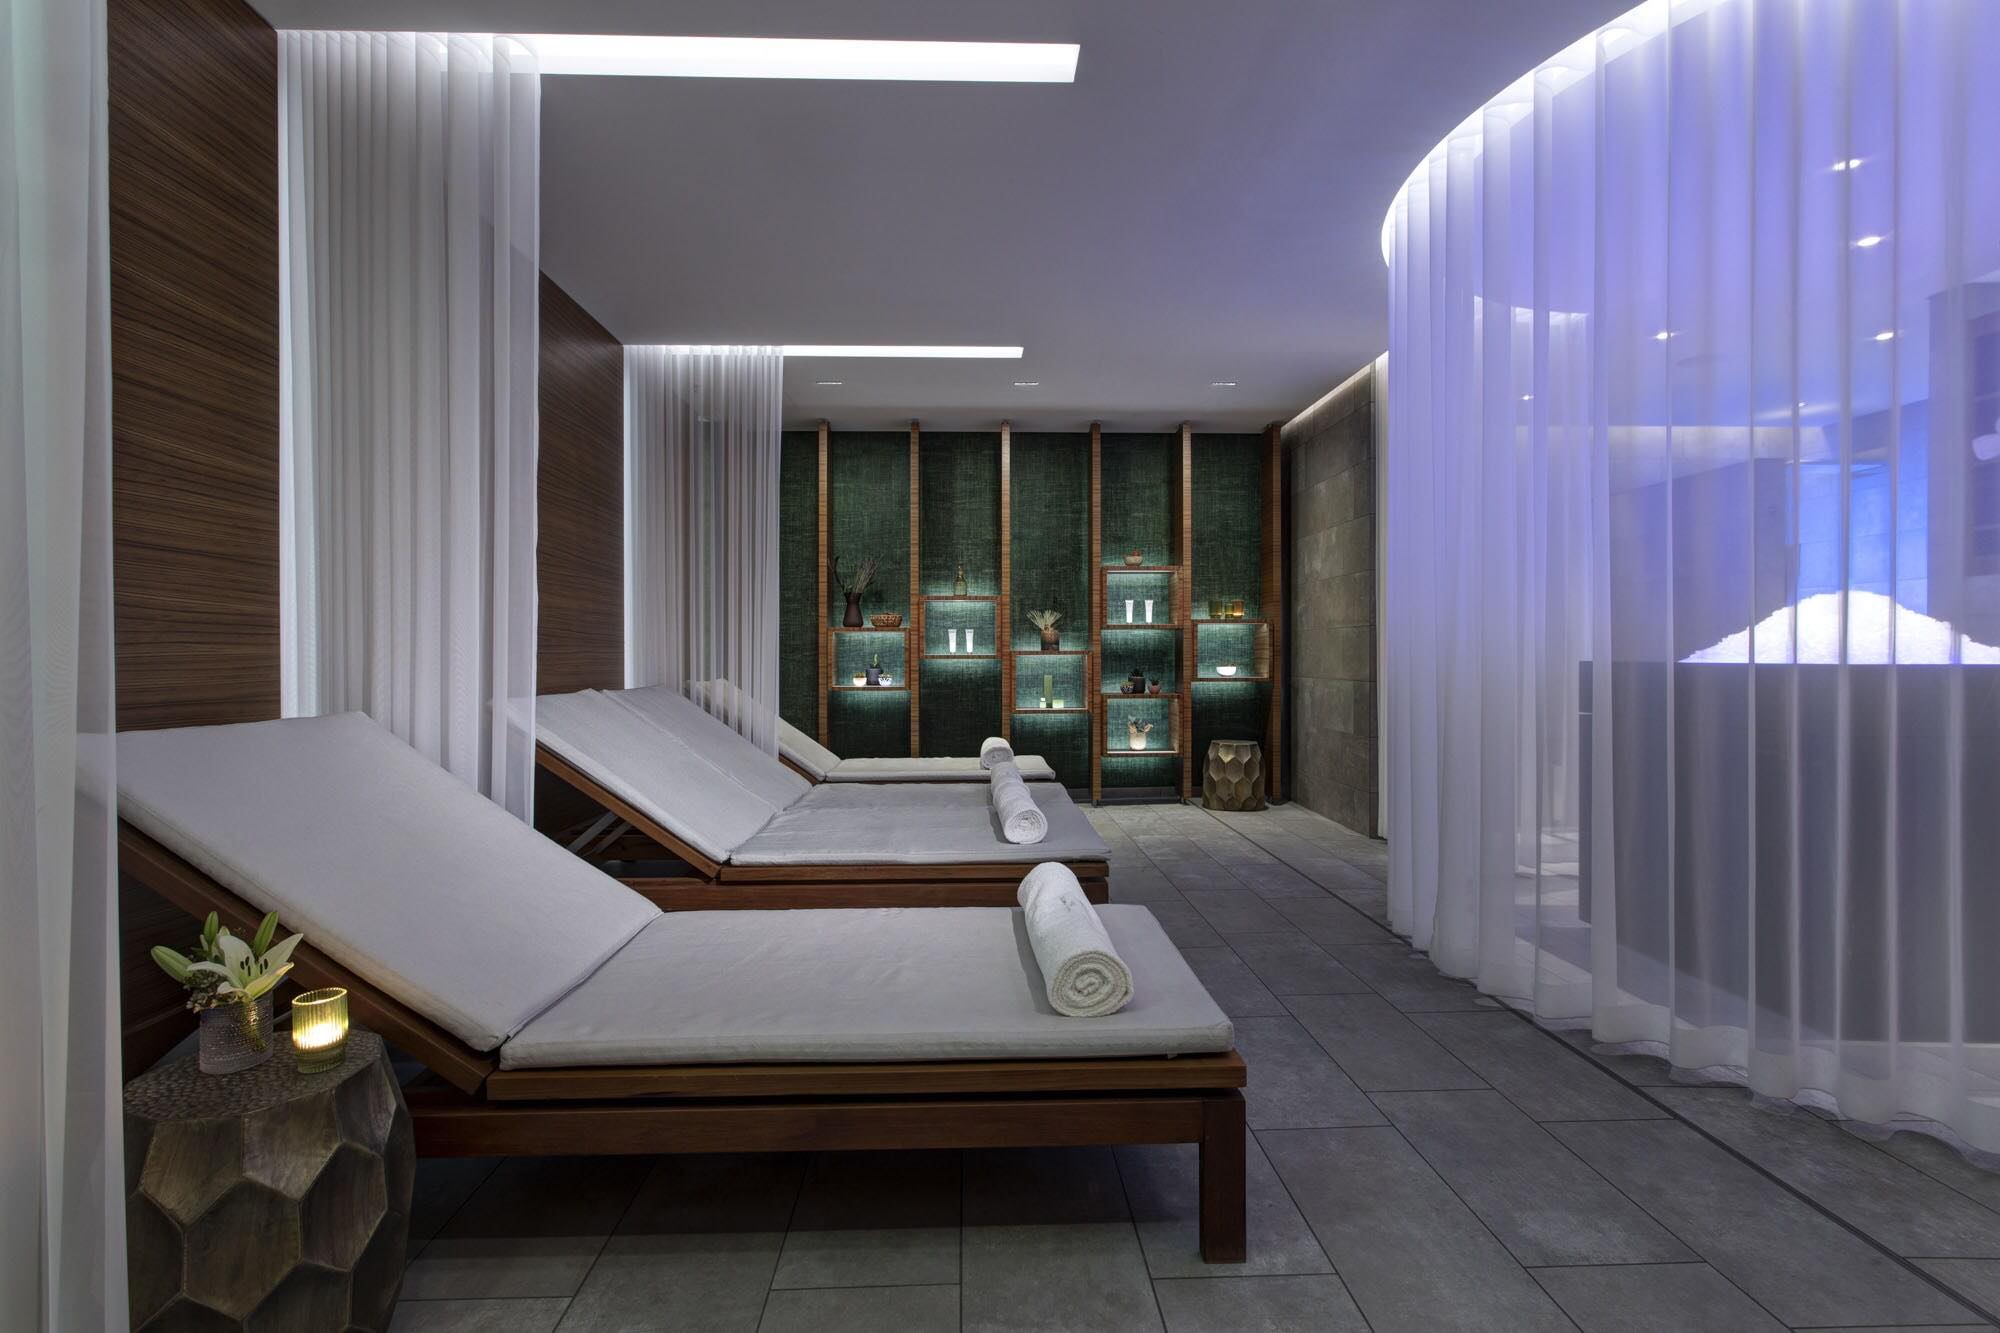 De Rome Spa at Hotel Rome is one of the best spa hotels in berlin